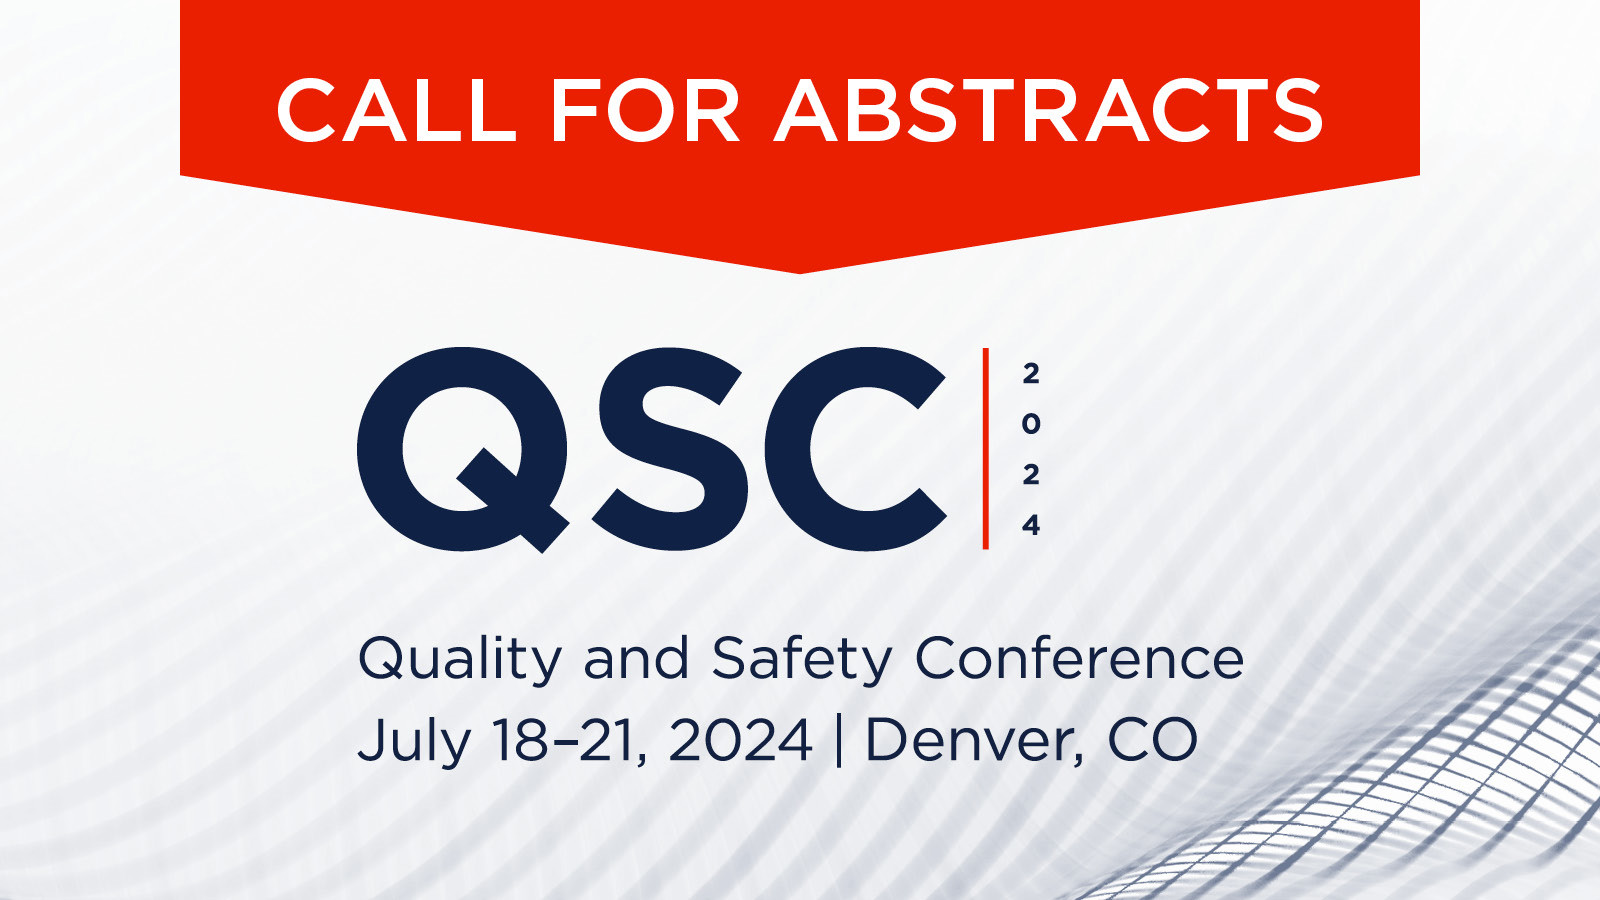 There Is Still Time to Submit an Abstract for the 2024 Quality and